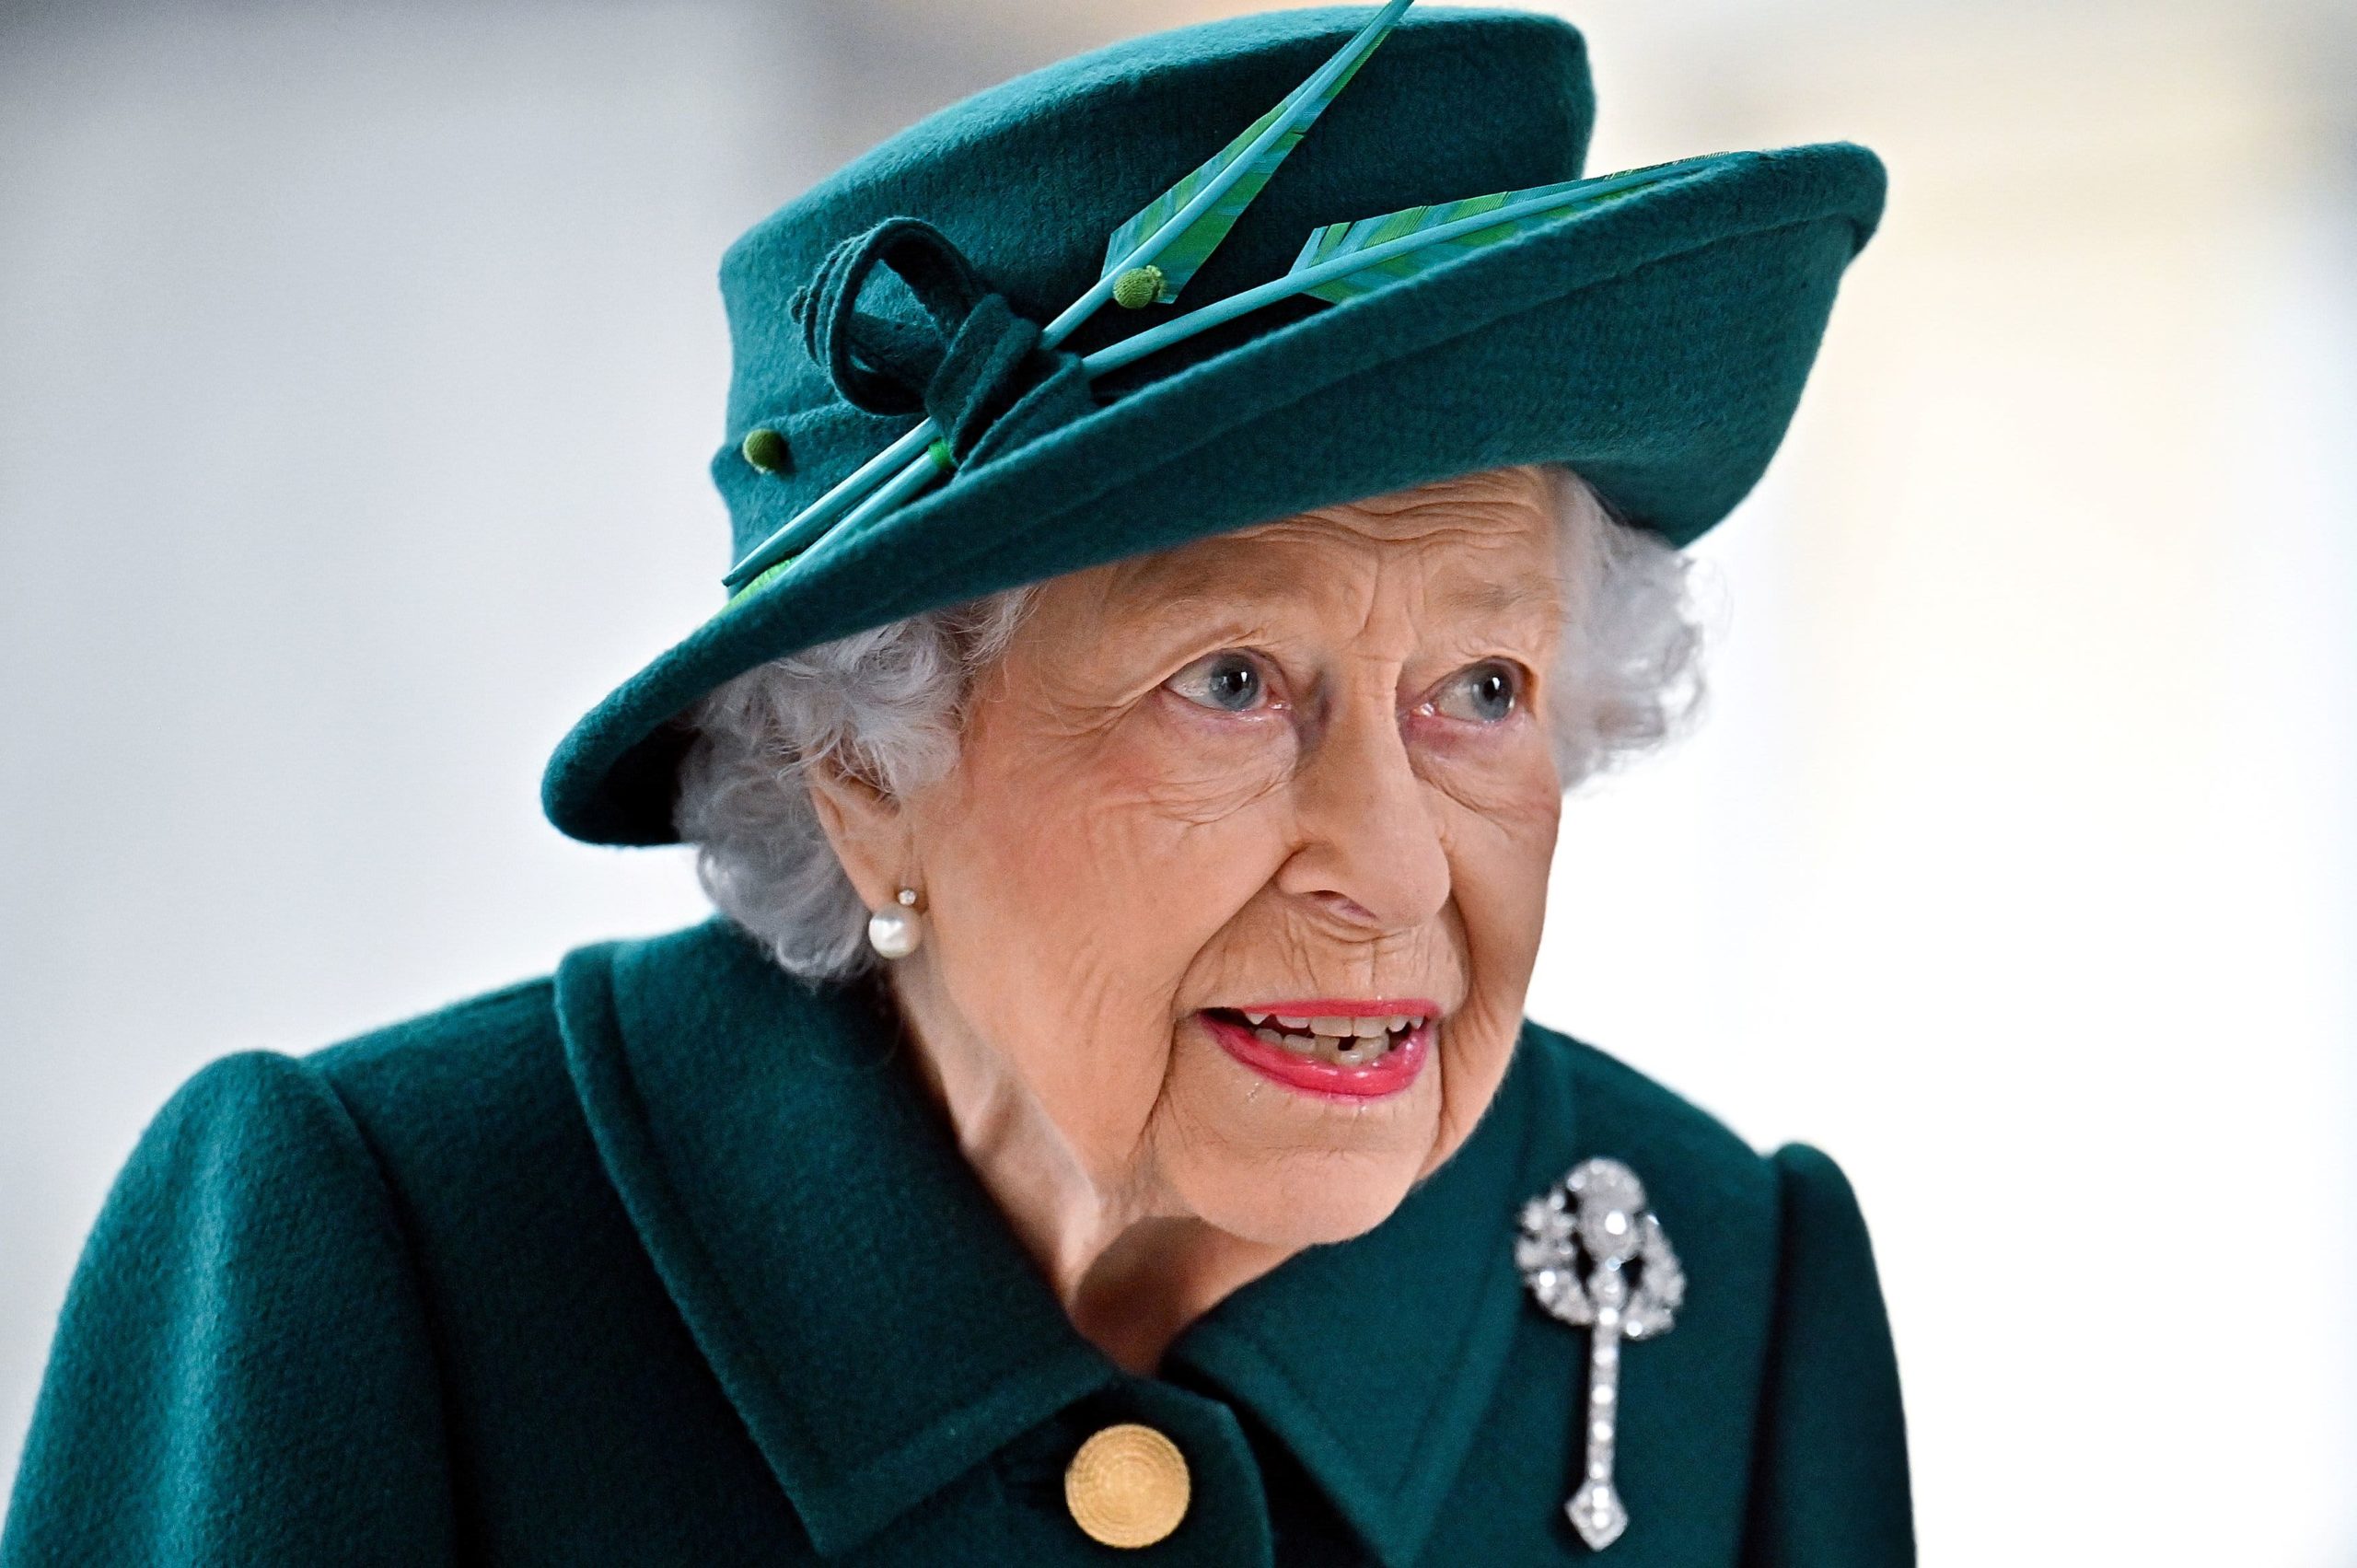 UK’s Queen Elizabeth to miss Cenotaph service due to back sprain